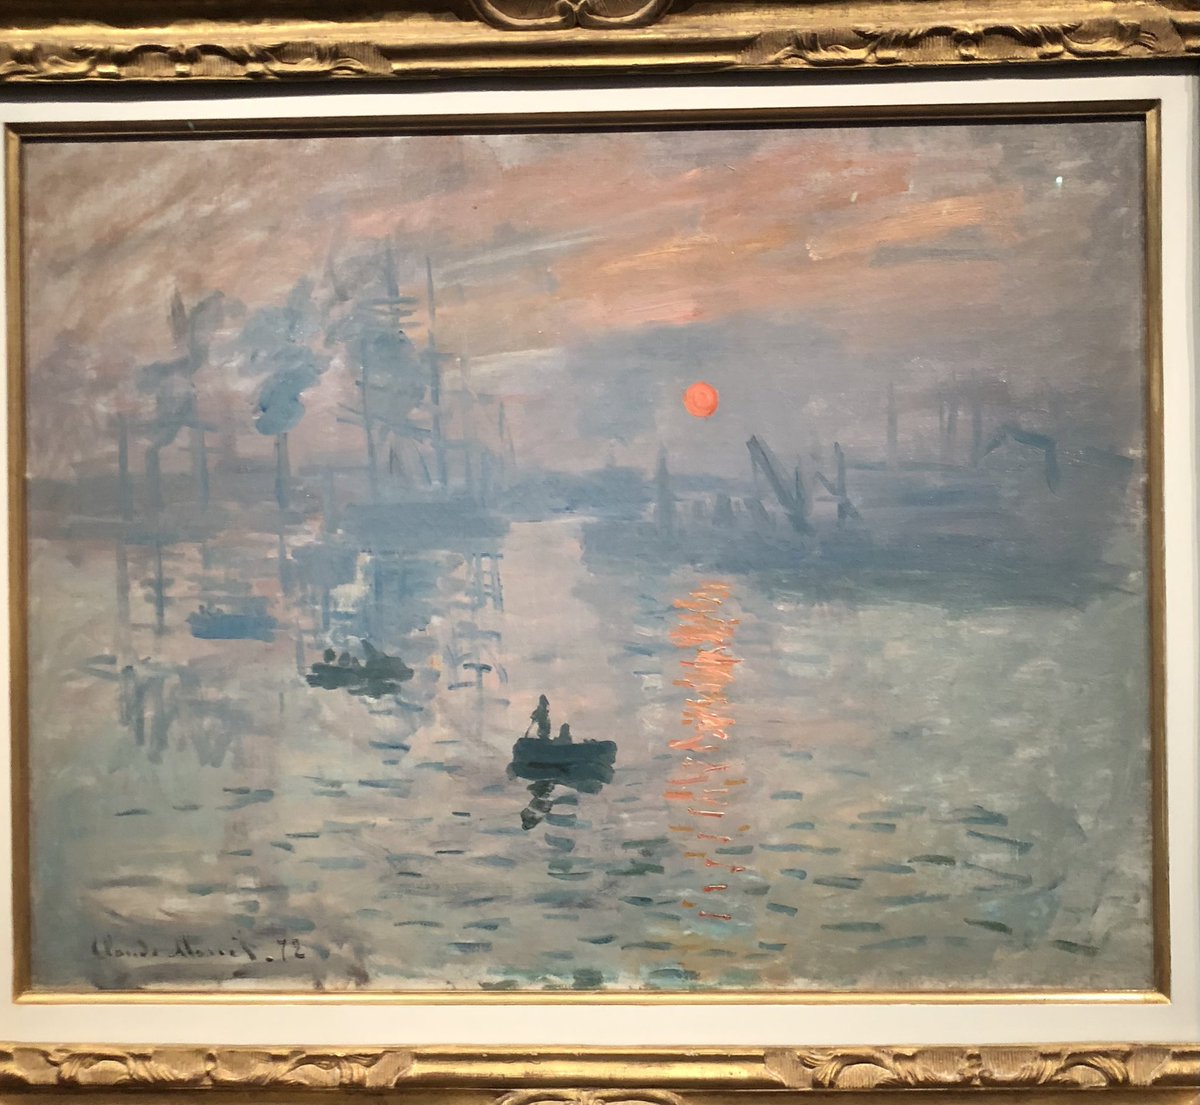 Almost 150 years to the day, I marked the opening of the first Impressionist exhibition (15 April 1874) by visiting the excellent #Paris1874 show @MuseeOrsay. / A da gweld wyneb cyfarwydd yn agor yr arddangosfa!